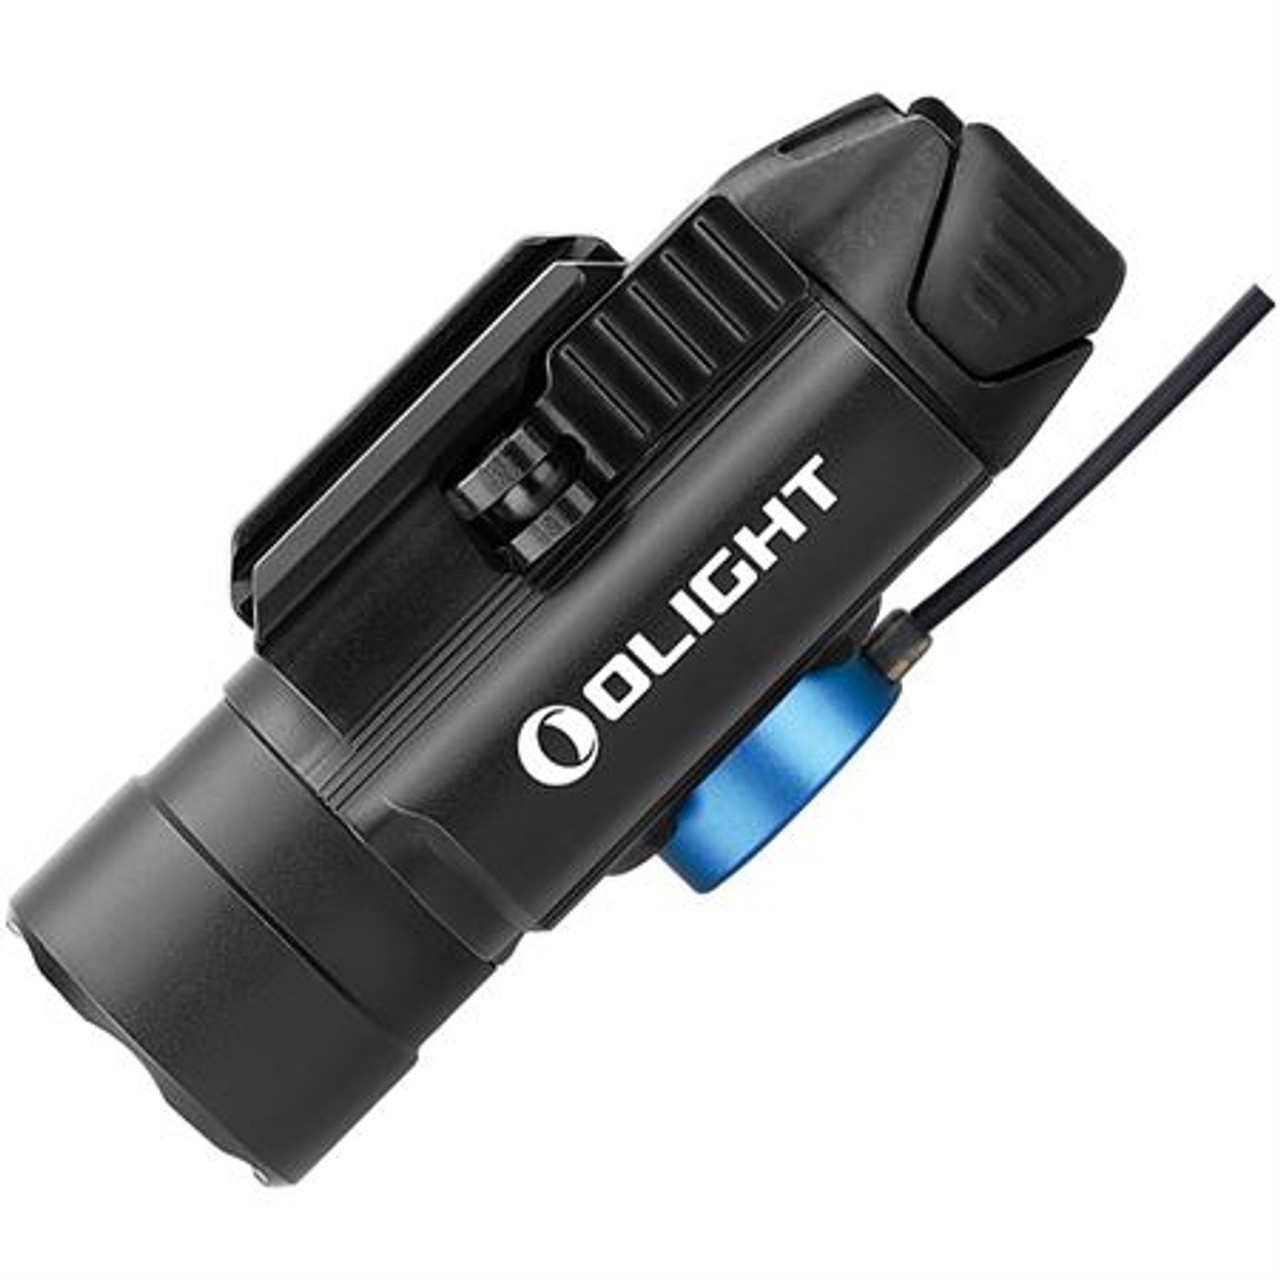 Olight PL-Pro Valkyrie 1500 lumens Tactical Weapons Light